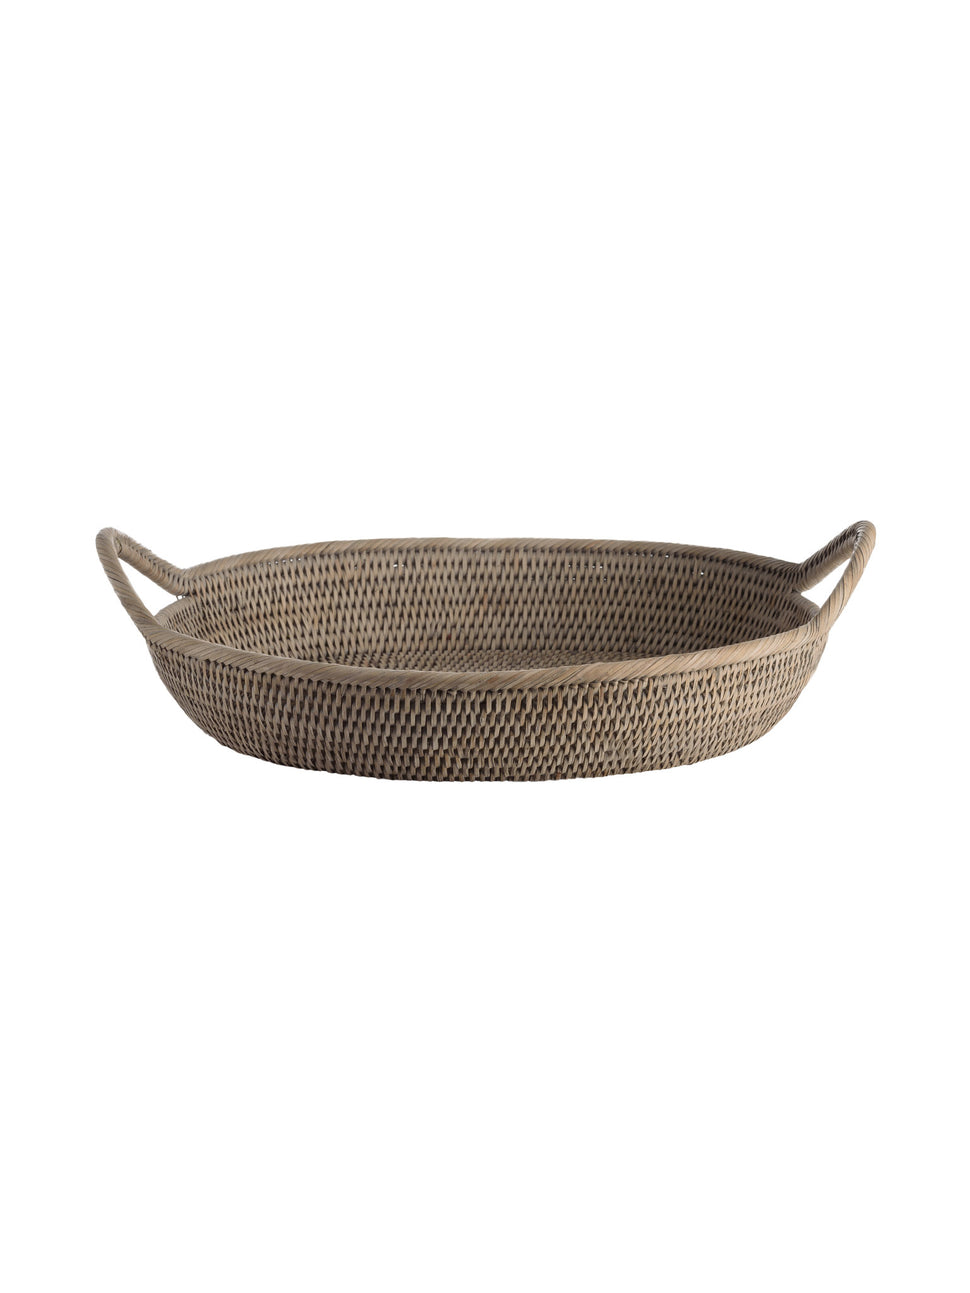 Rattan Tray Large Oval